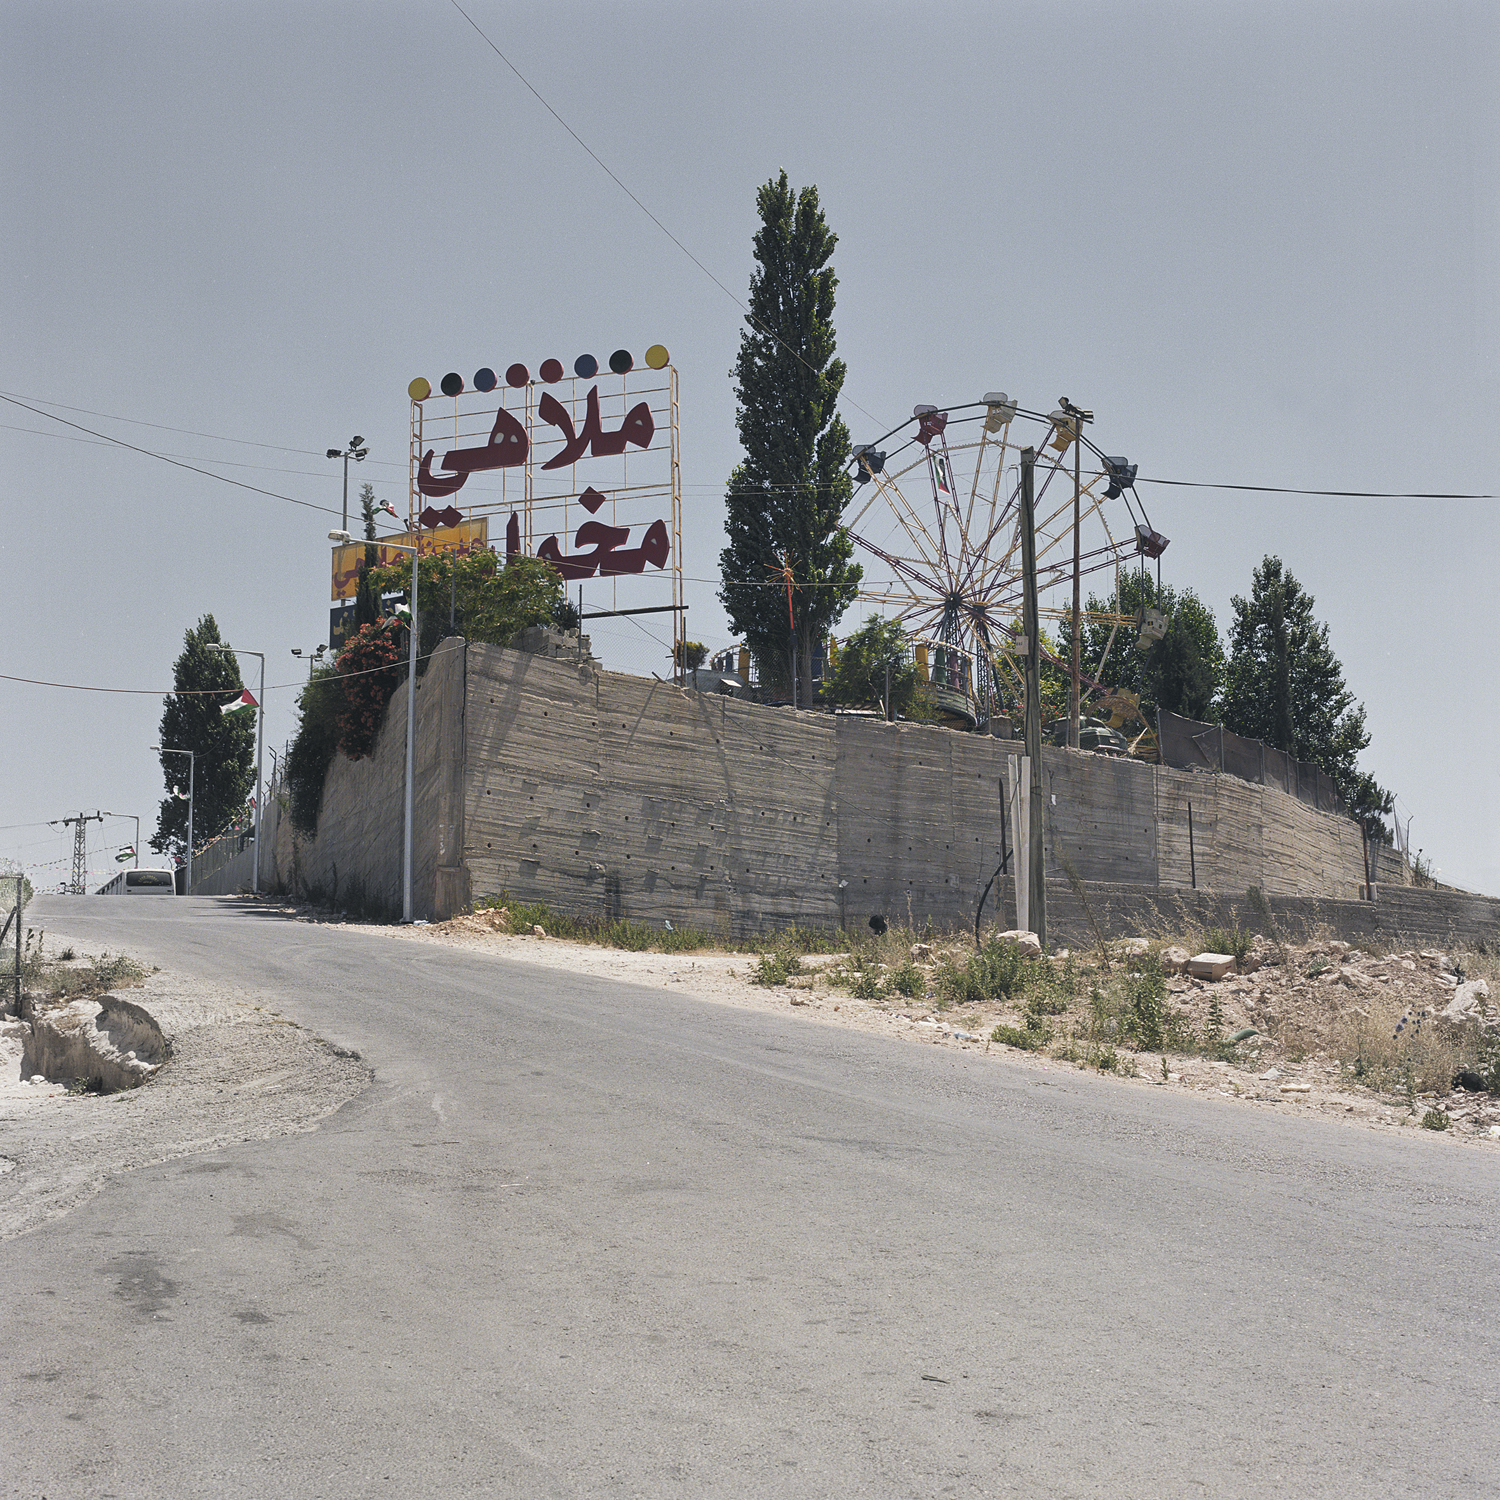 Mukhma's Funland, Palestinian Territories
                              
                              
                               On the dry, dusty West Bank the cities are packed tightly together—the occupied territories are tiny—but as a result of all the Israeli checkpoints, a short trip can become agonizingly long. Even so, Palestinians from Nablus, Hebron and Jerusalem are willing to make the journey to visit Funland. From the outside, the amusement park looks like a concrete fort with a Ferris wheel. At a nearby army base, Palestinian security forces survey the scene from watchtowers. The Ferris wheel offers a sweeping view of Jerusalem and the long, snaking separation barrier.